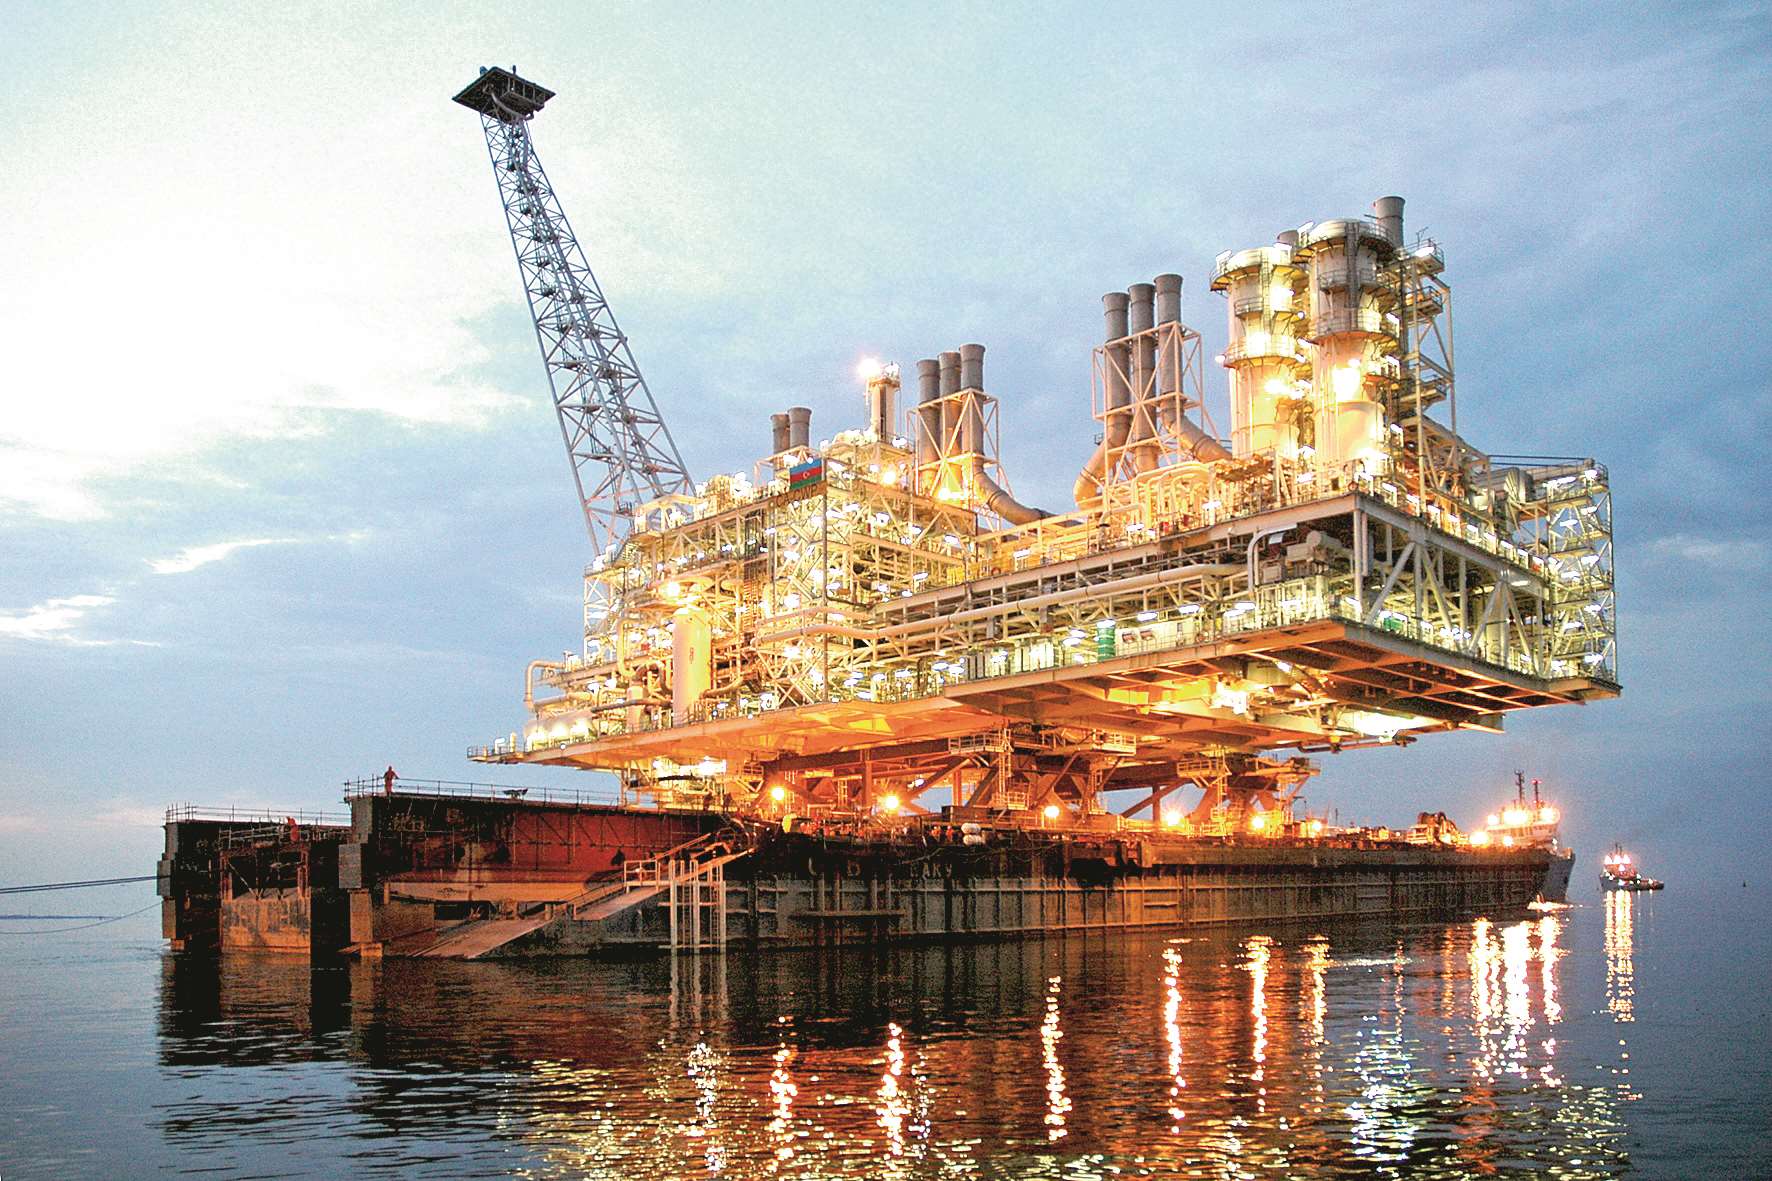 Wozair supplies ventilation systems for oil rigs